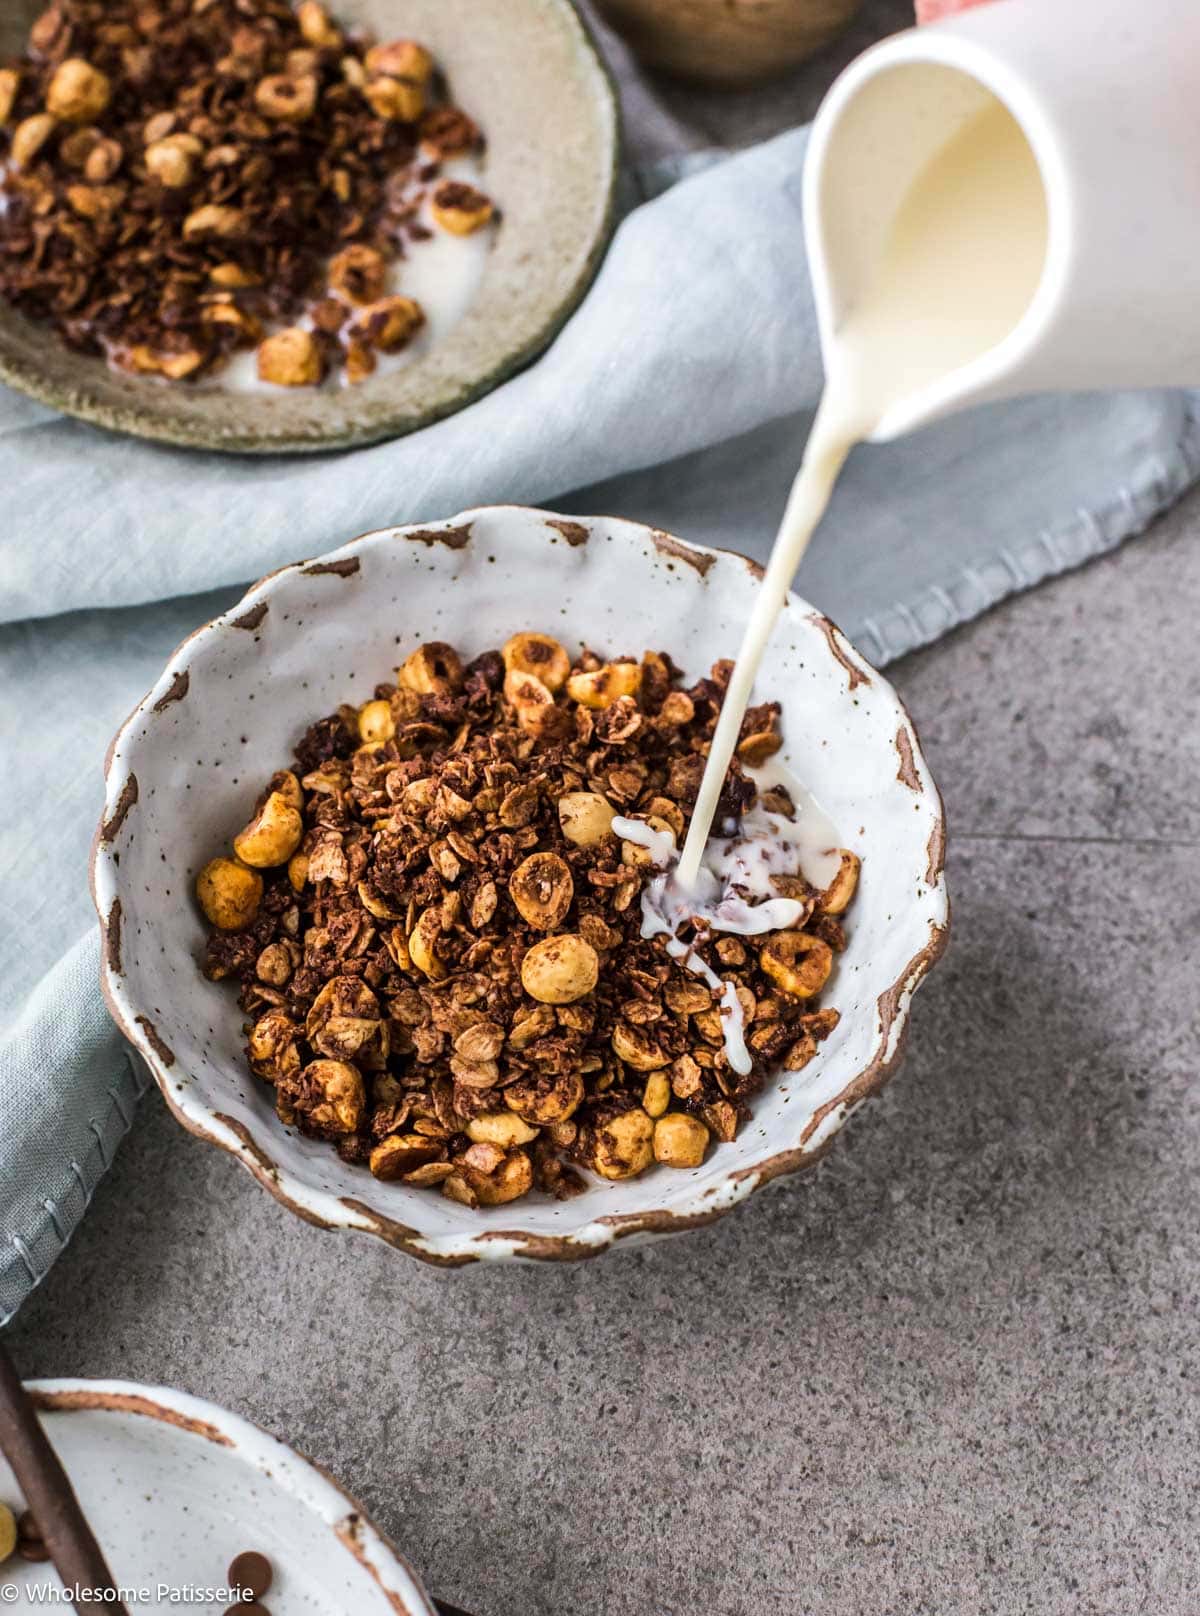 Hazelnut granola in cereal bowl with milk being poured in.